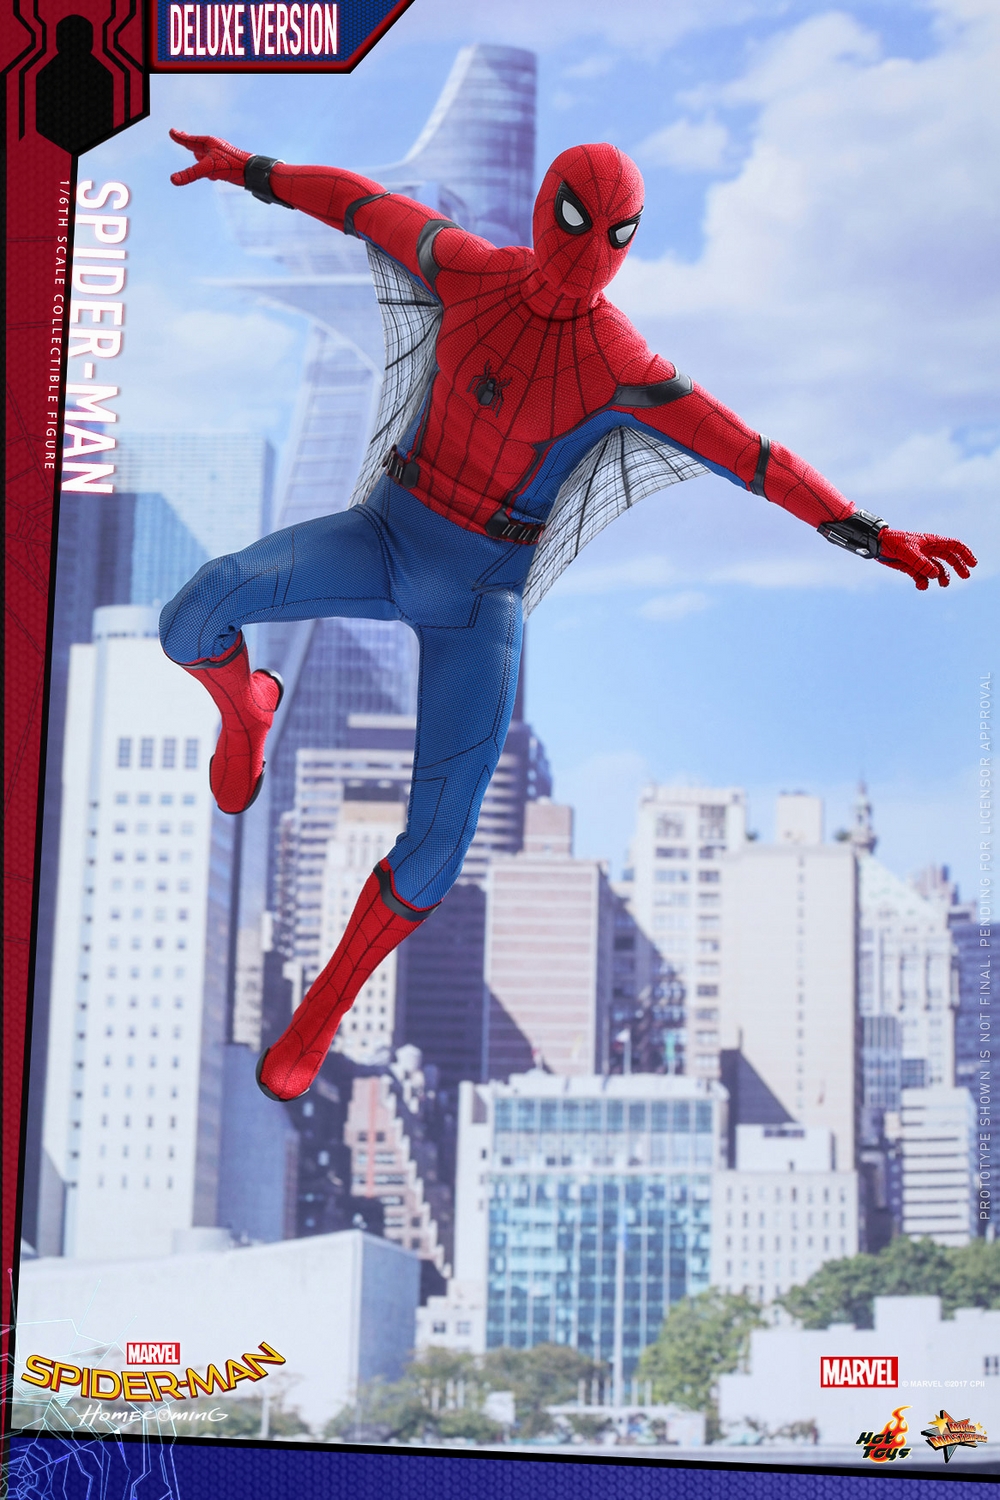 Hot-Toys-MMS426-Spider-Man-Homecoming-Deluxe-006.jpg